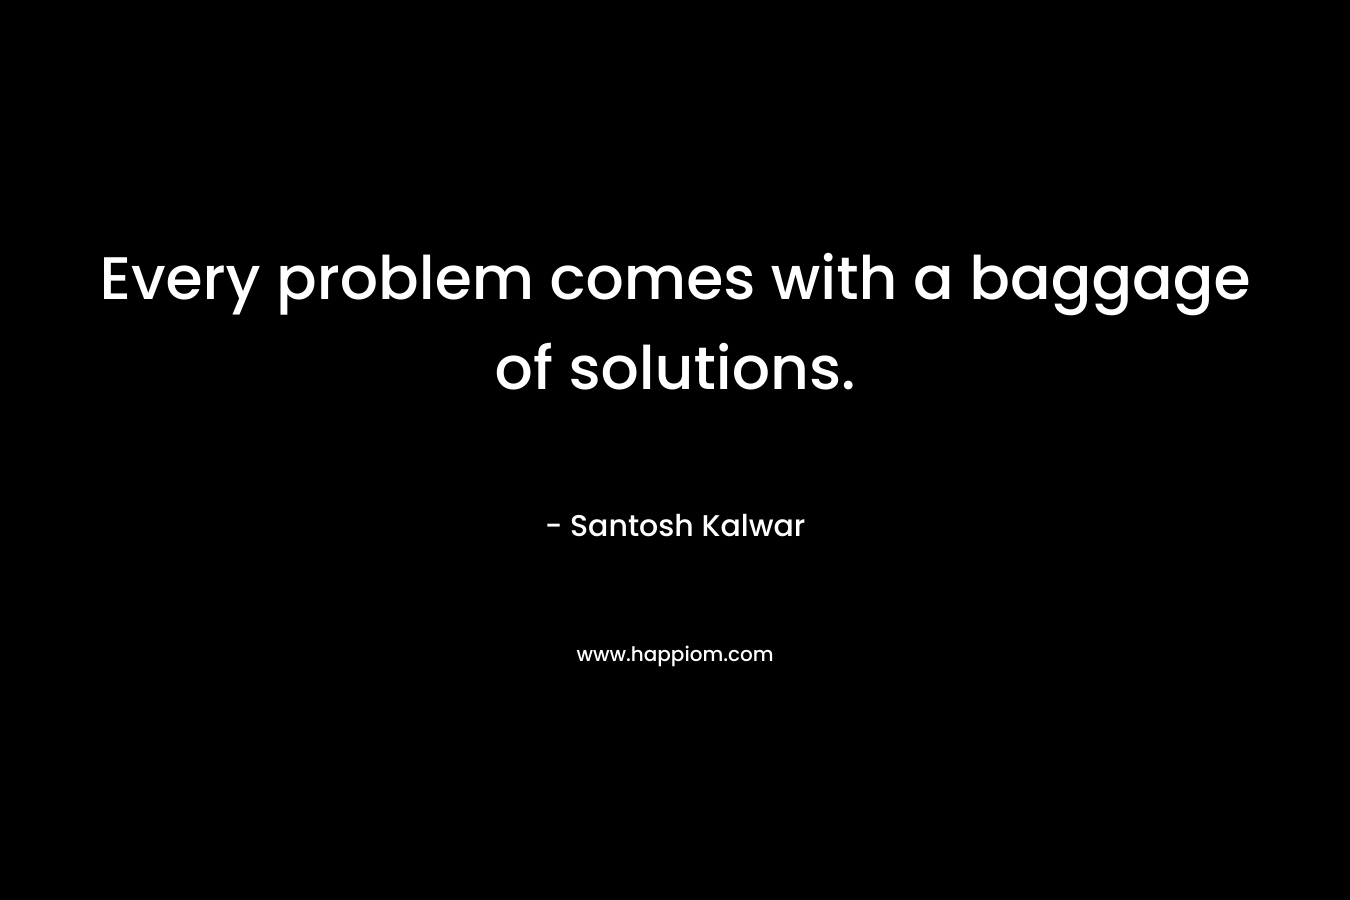 Every problem comes with a baggage of solutions. – Santosh Kalwar